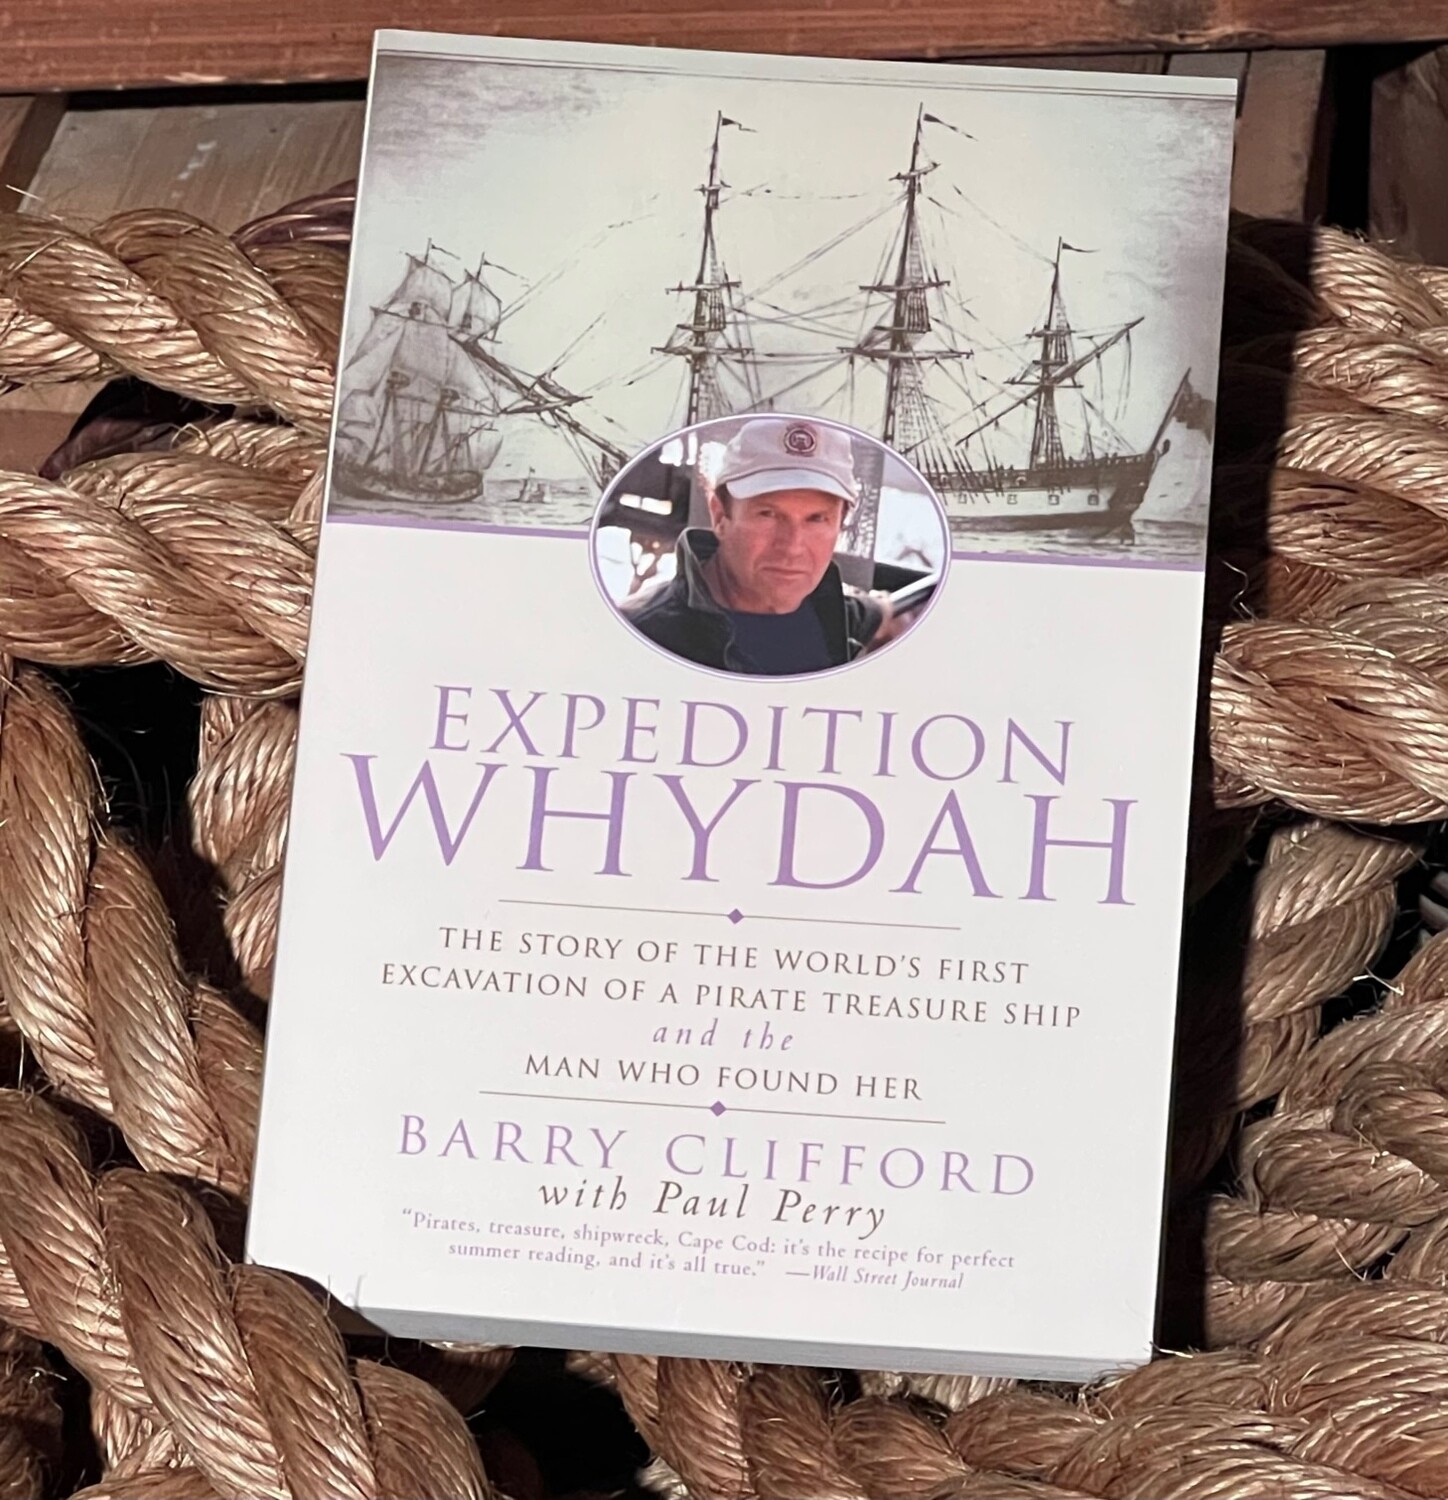 Expedition Whydah by Barry Clifford